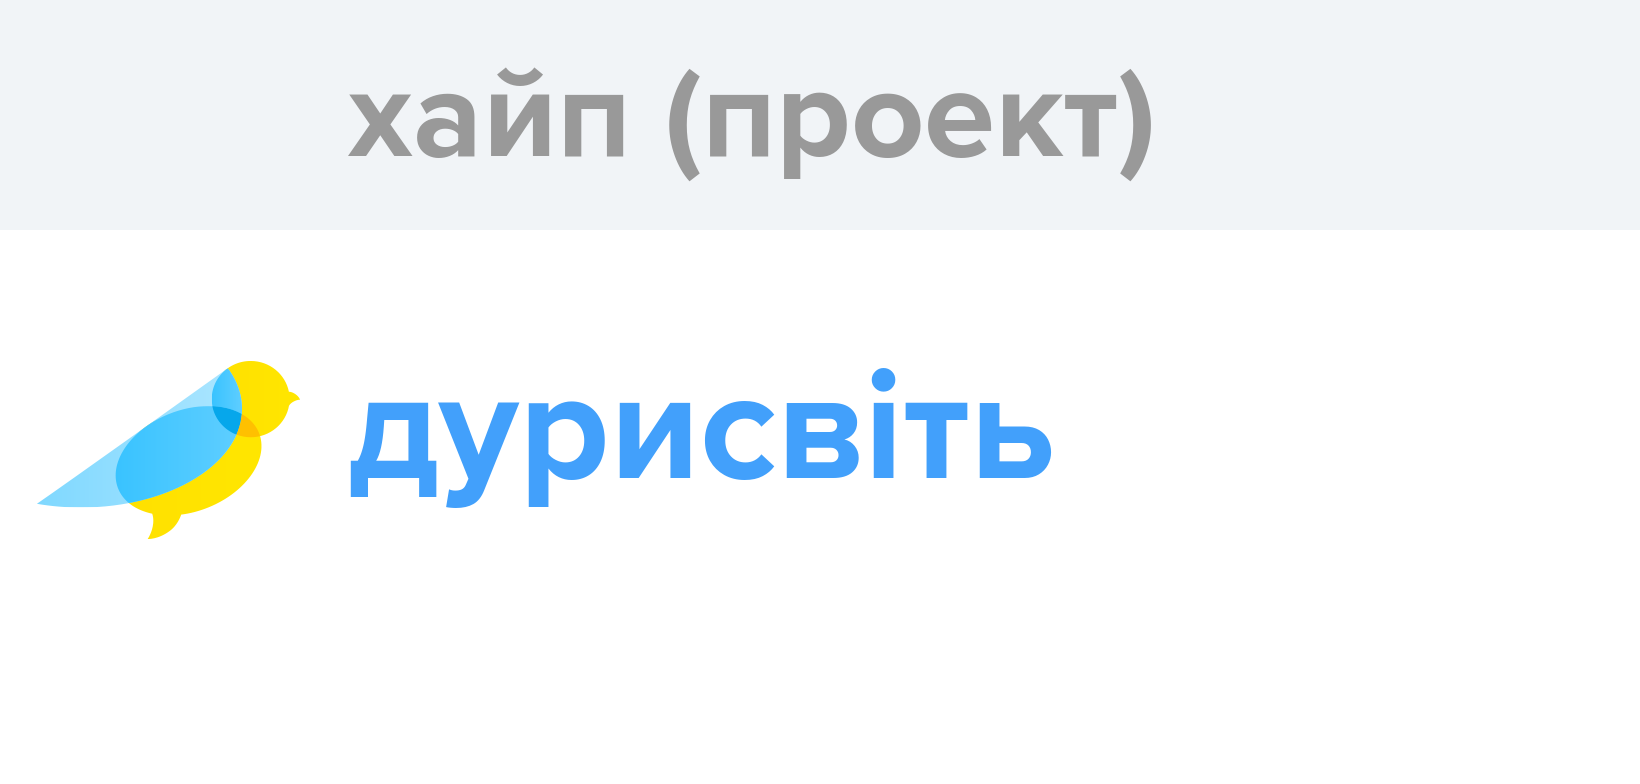 The site says хайп: Popular article